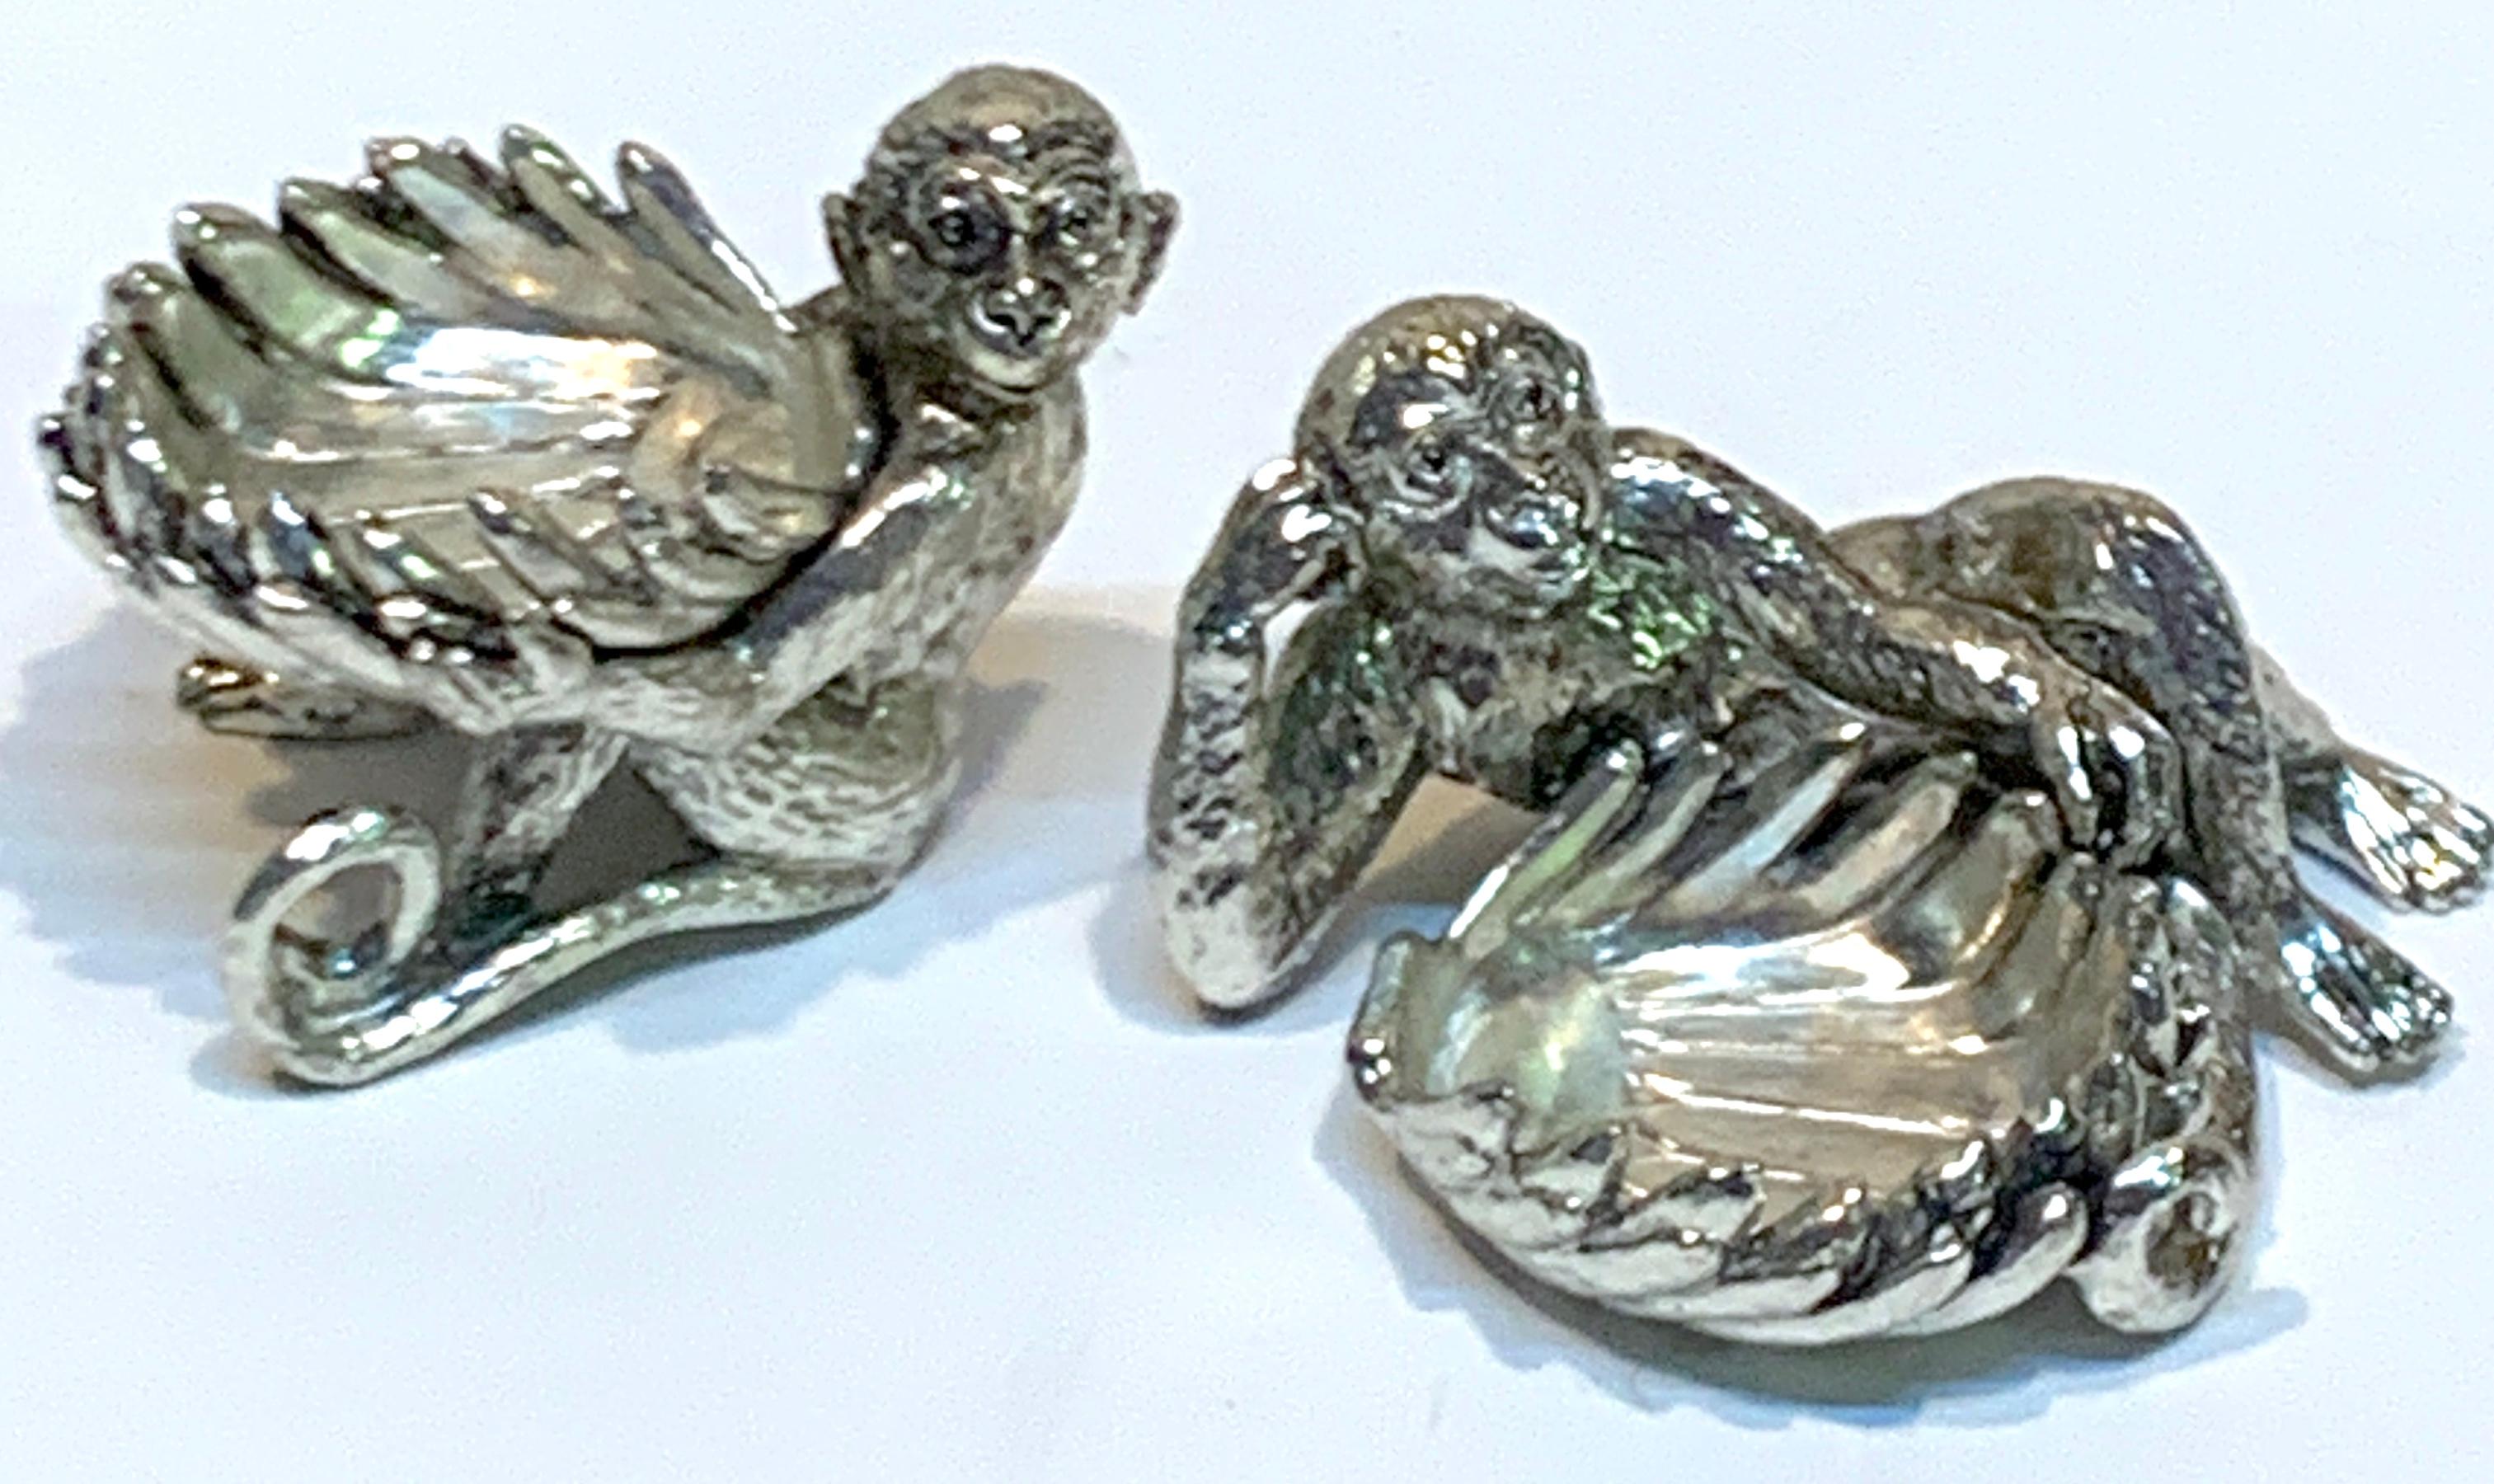 Pair of silver plated reclining monkey salts or nut dishes each one realistically cast and modeled holding banana bowls. Unmarked. 
Reclining monkey measures 3.75